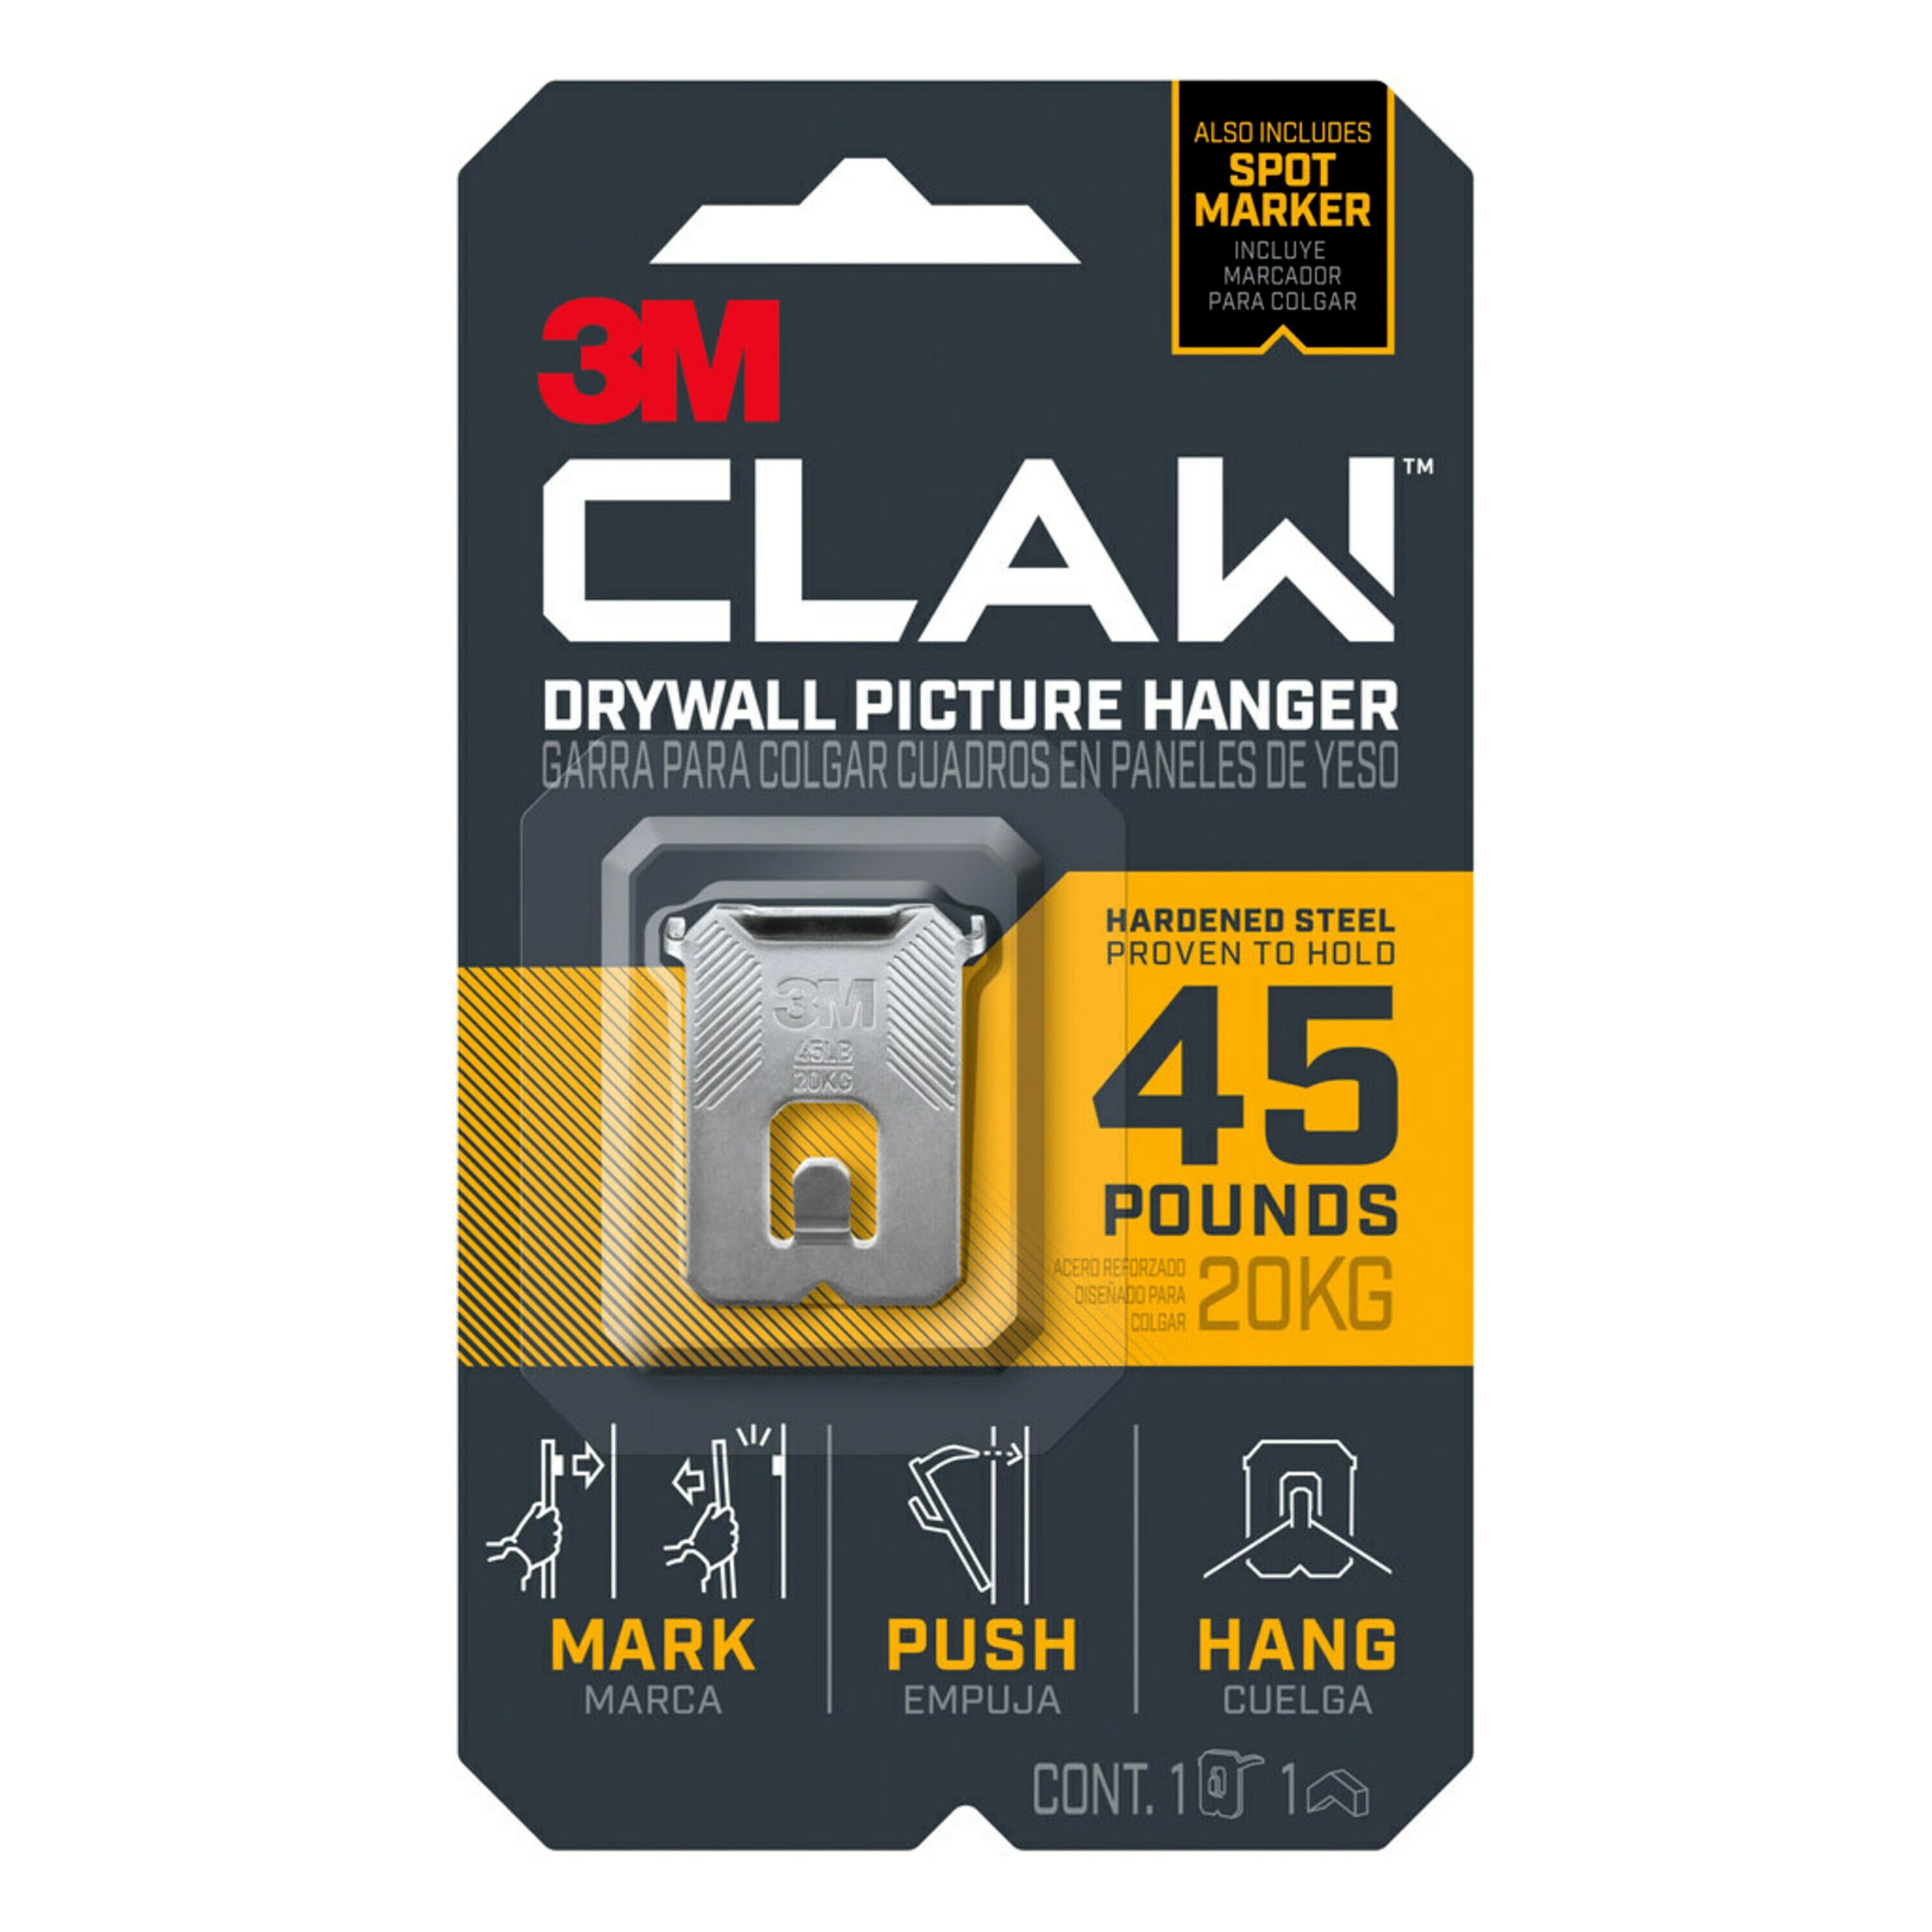 3M CLAW™ 45lb. Drywall Picture Hanger